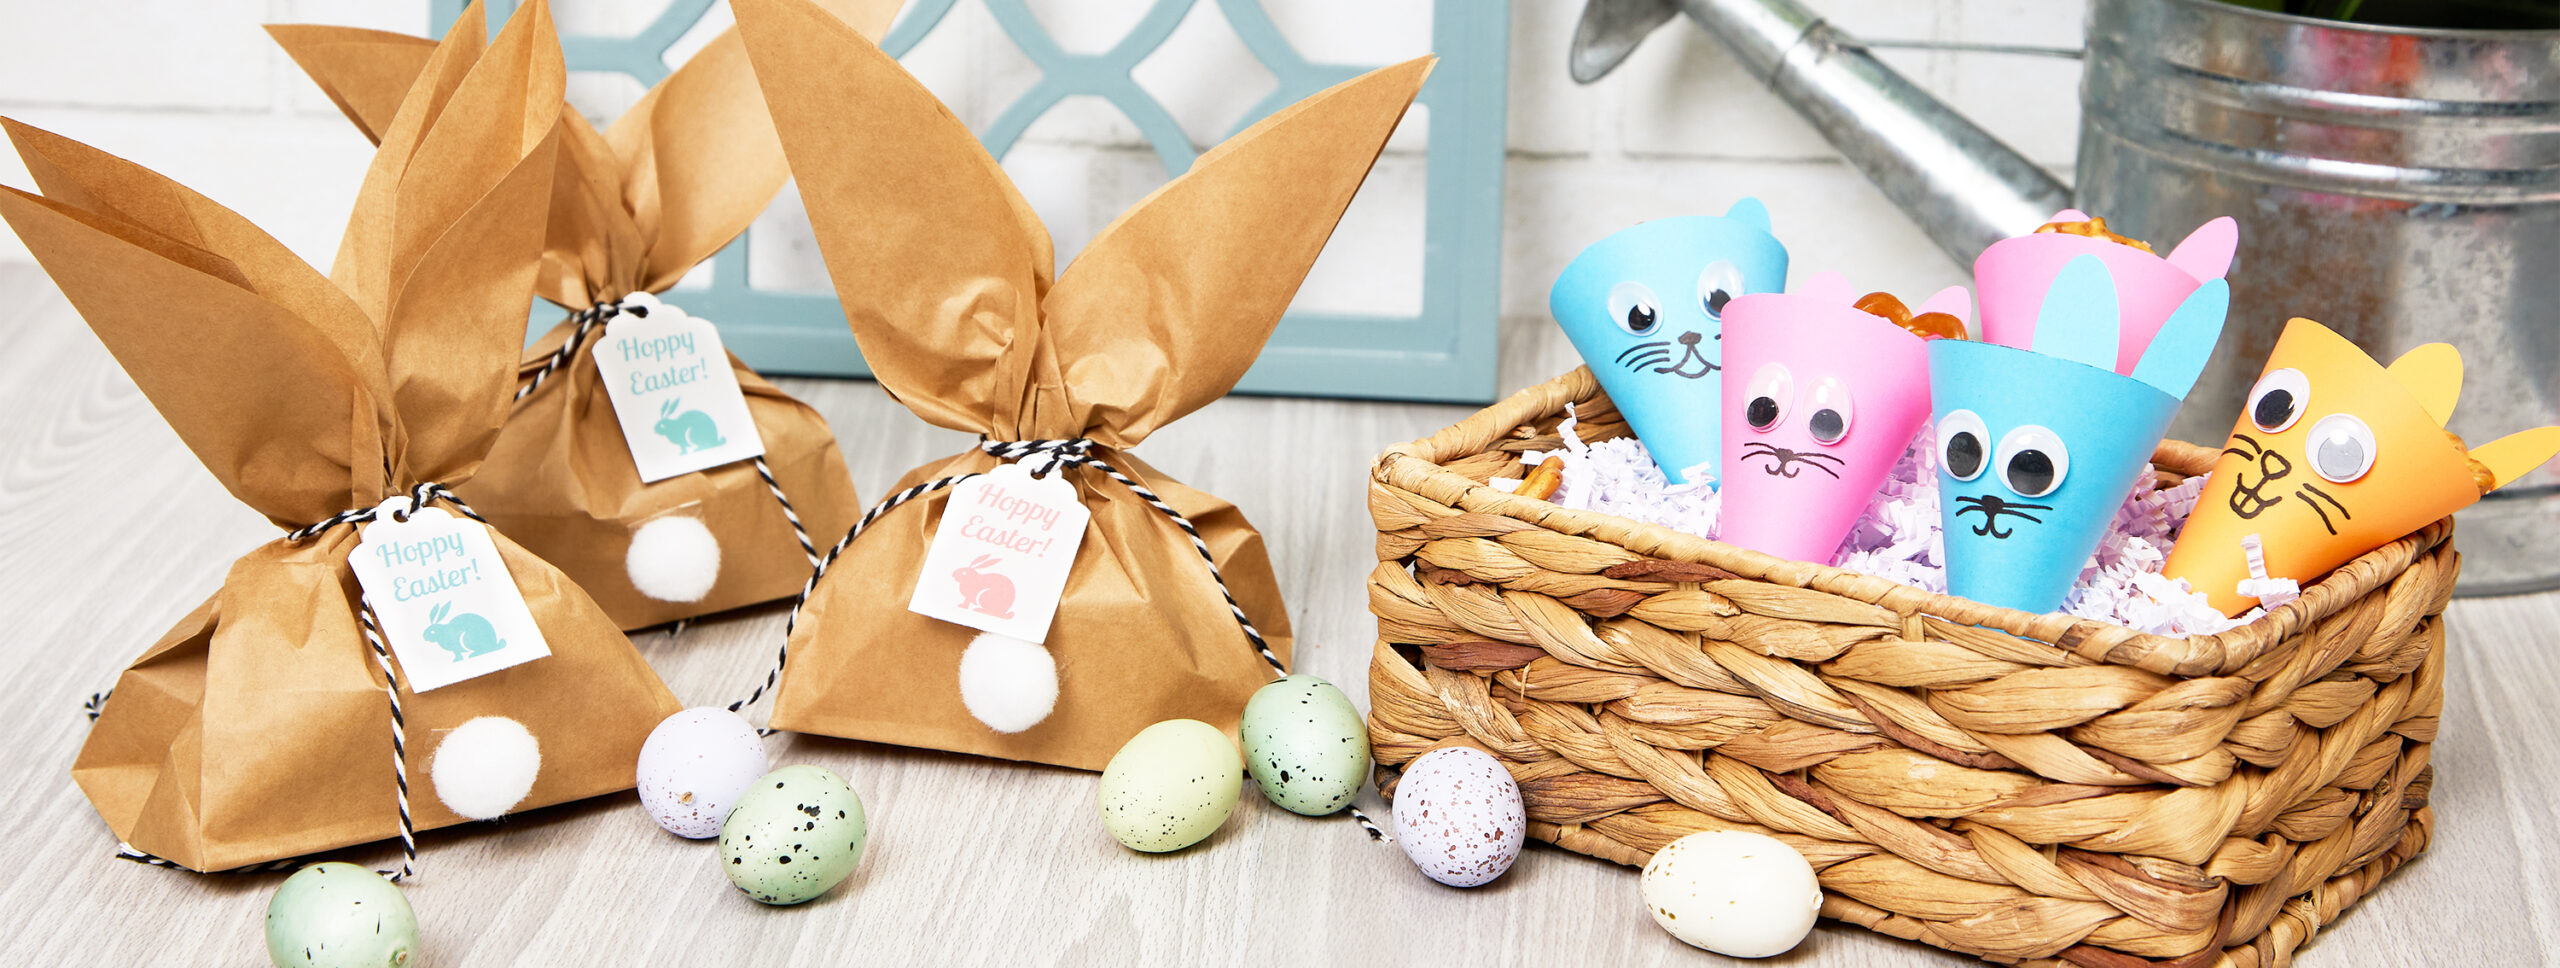 https://www.avery.com/blog/wp-content/uploads/2019/03/easter-treats-article-banner-scaled.jpg